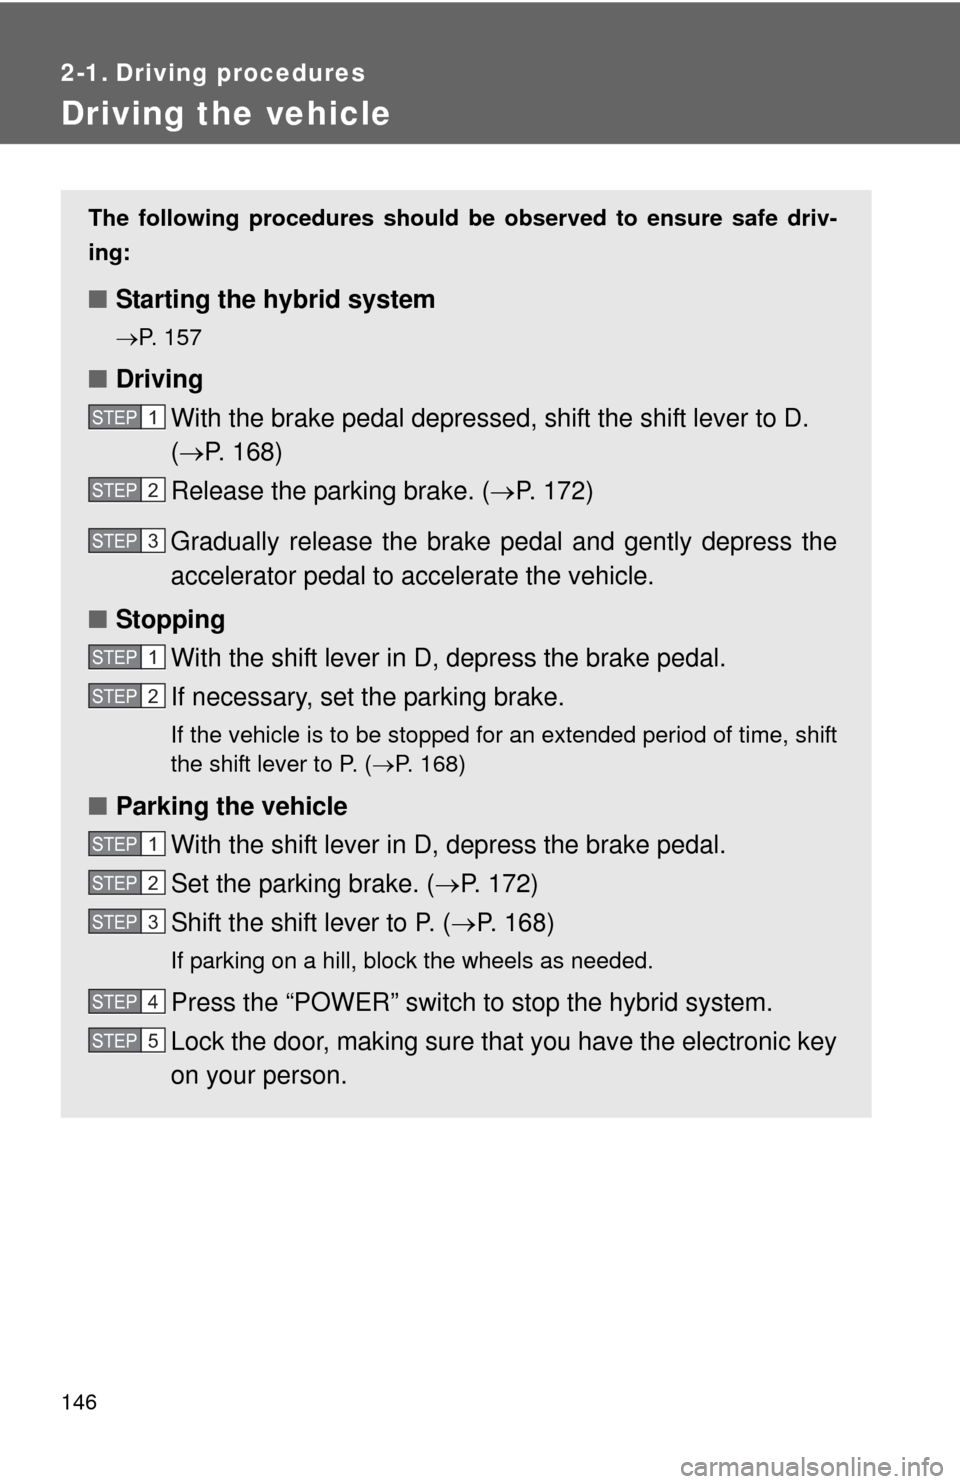 TOYOTA CAMRY HYBRID 2014 XV50 / 9.G Owners Manual 146
2-1. Driving procedures
Driving the vehicle
The following procedures should be observed to ensure safe driv-
ing:
■ Starting the hybrid system
P. 157
■Driving
With the brake pedal depressed